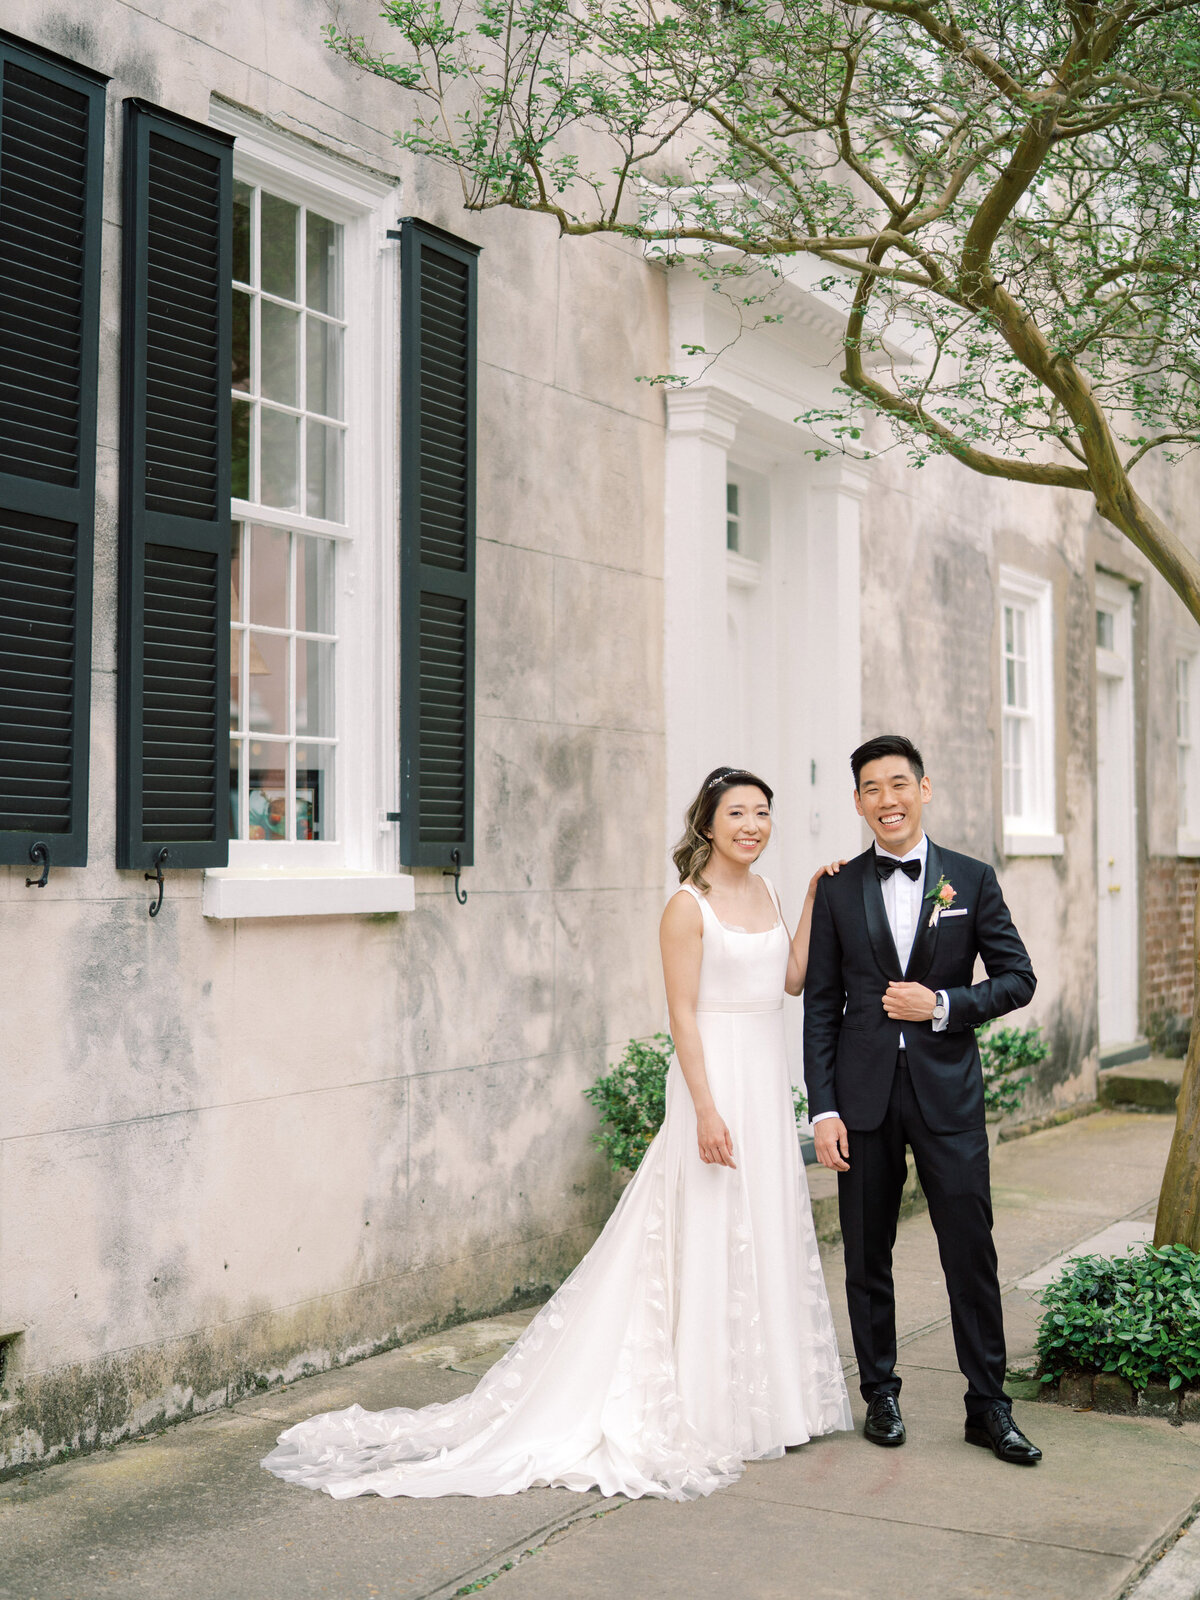 Cannon-Green-Wedding-in-charleston-photo-by-philip-casey-photography-056